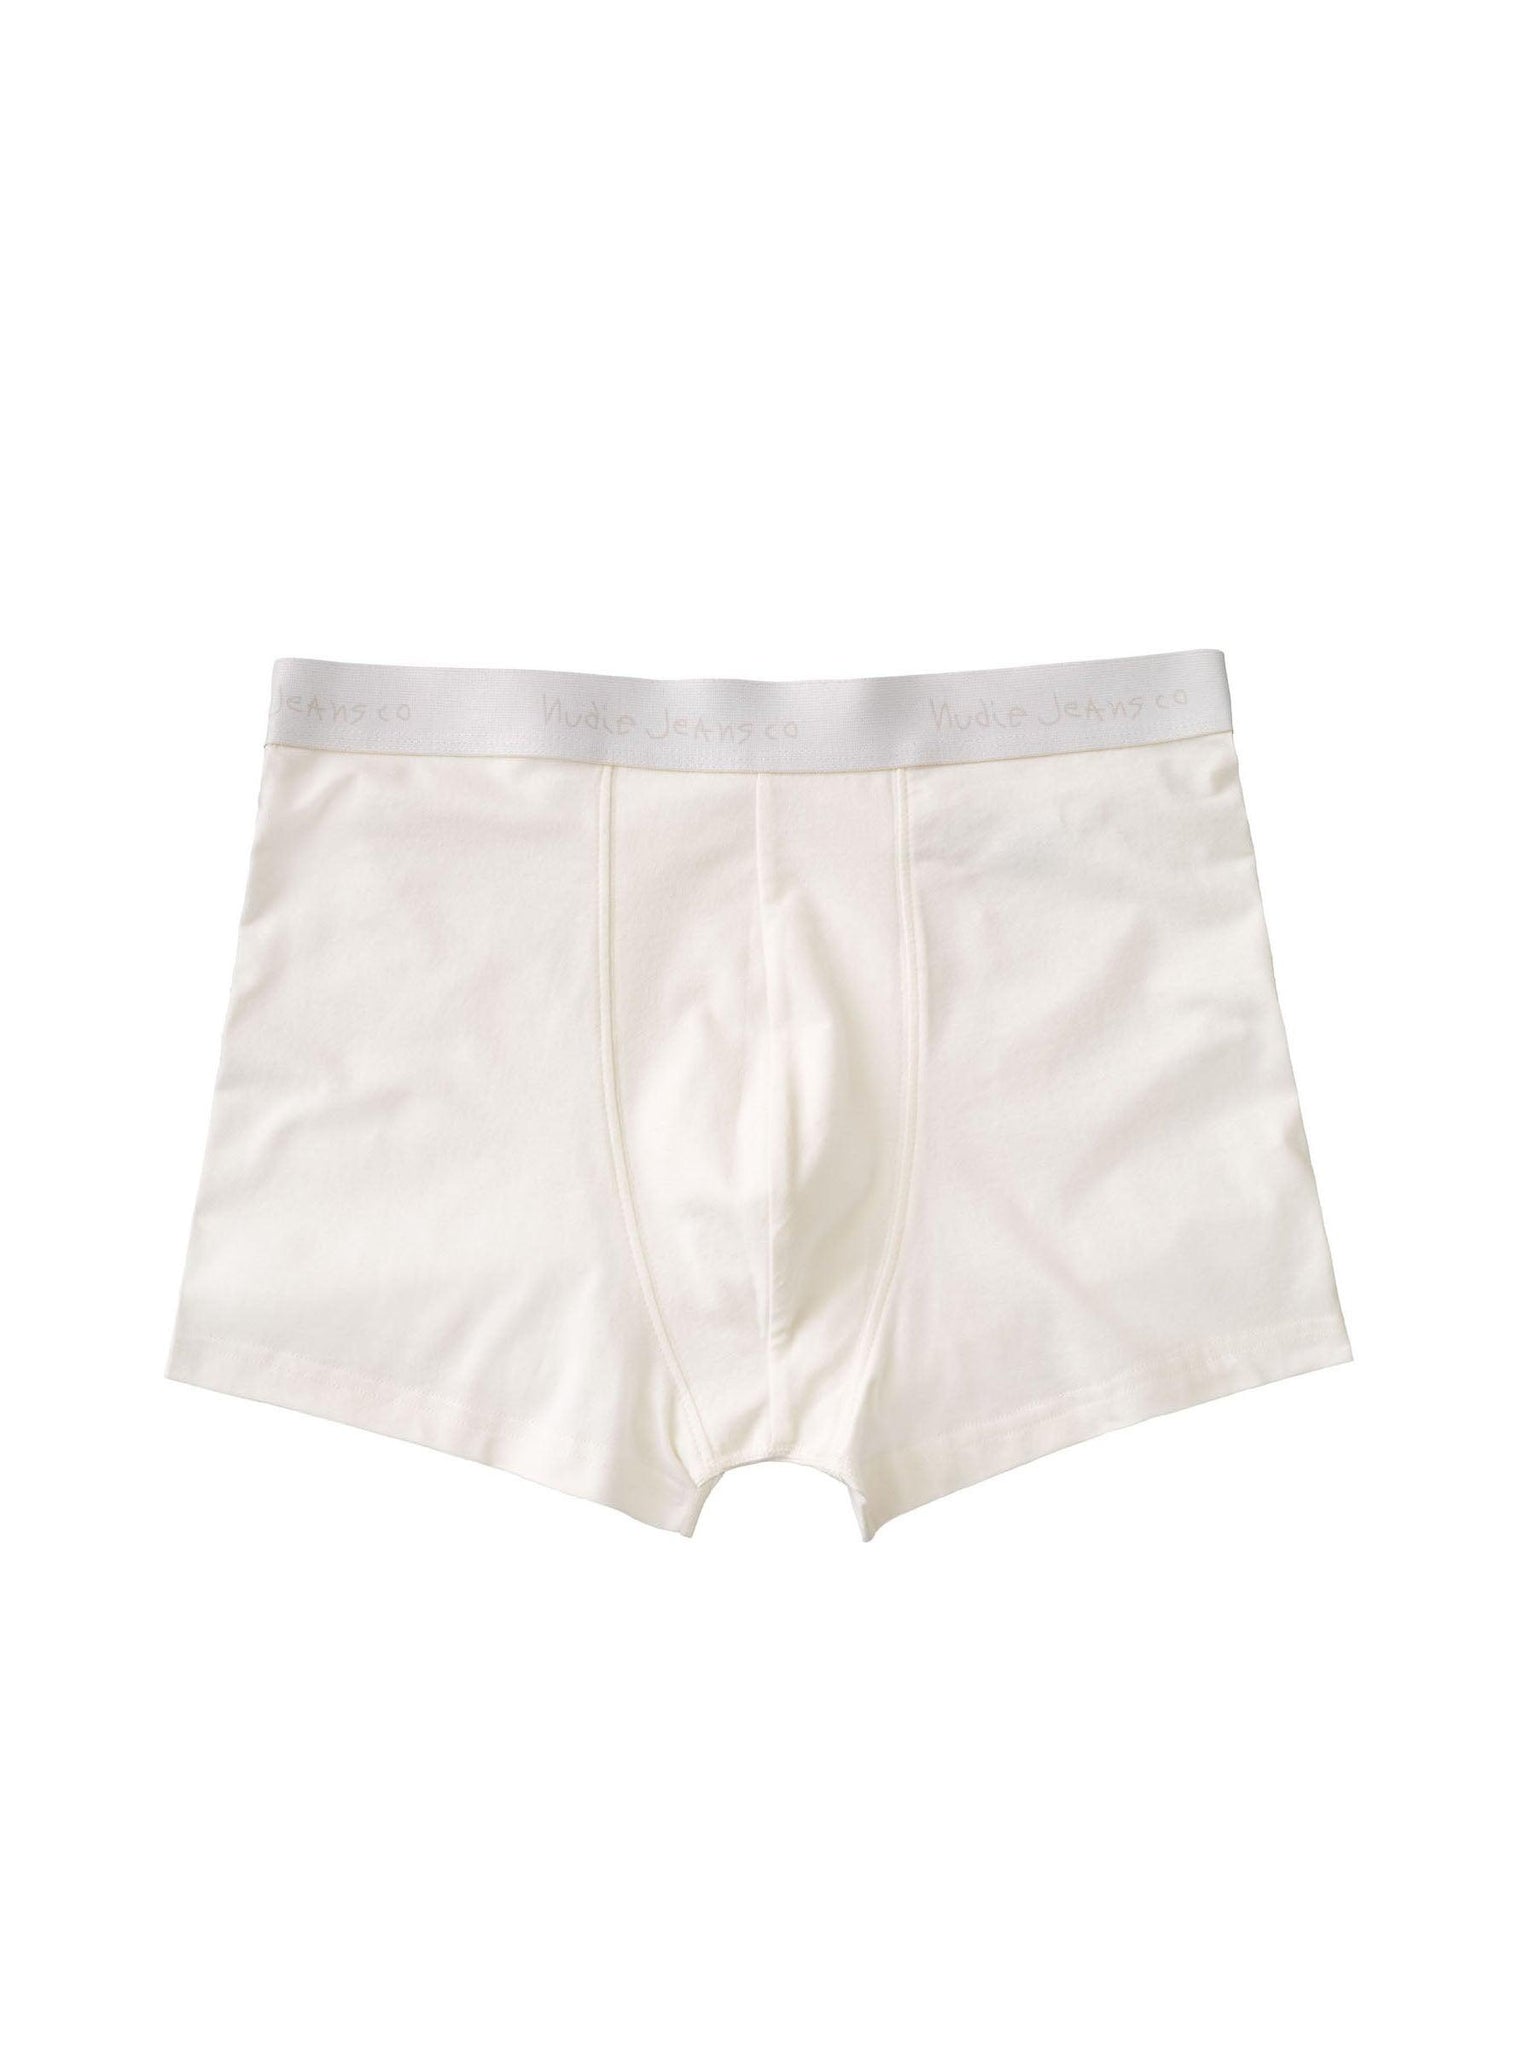 Boxer Briefs 1-Pack Offwhite - INHABIT - Exclusive Stockist of Nudie Jeans